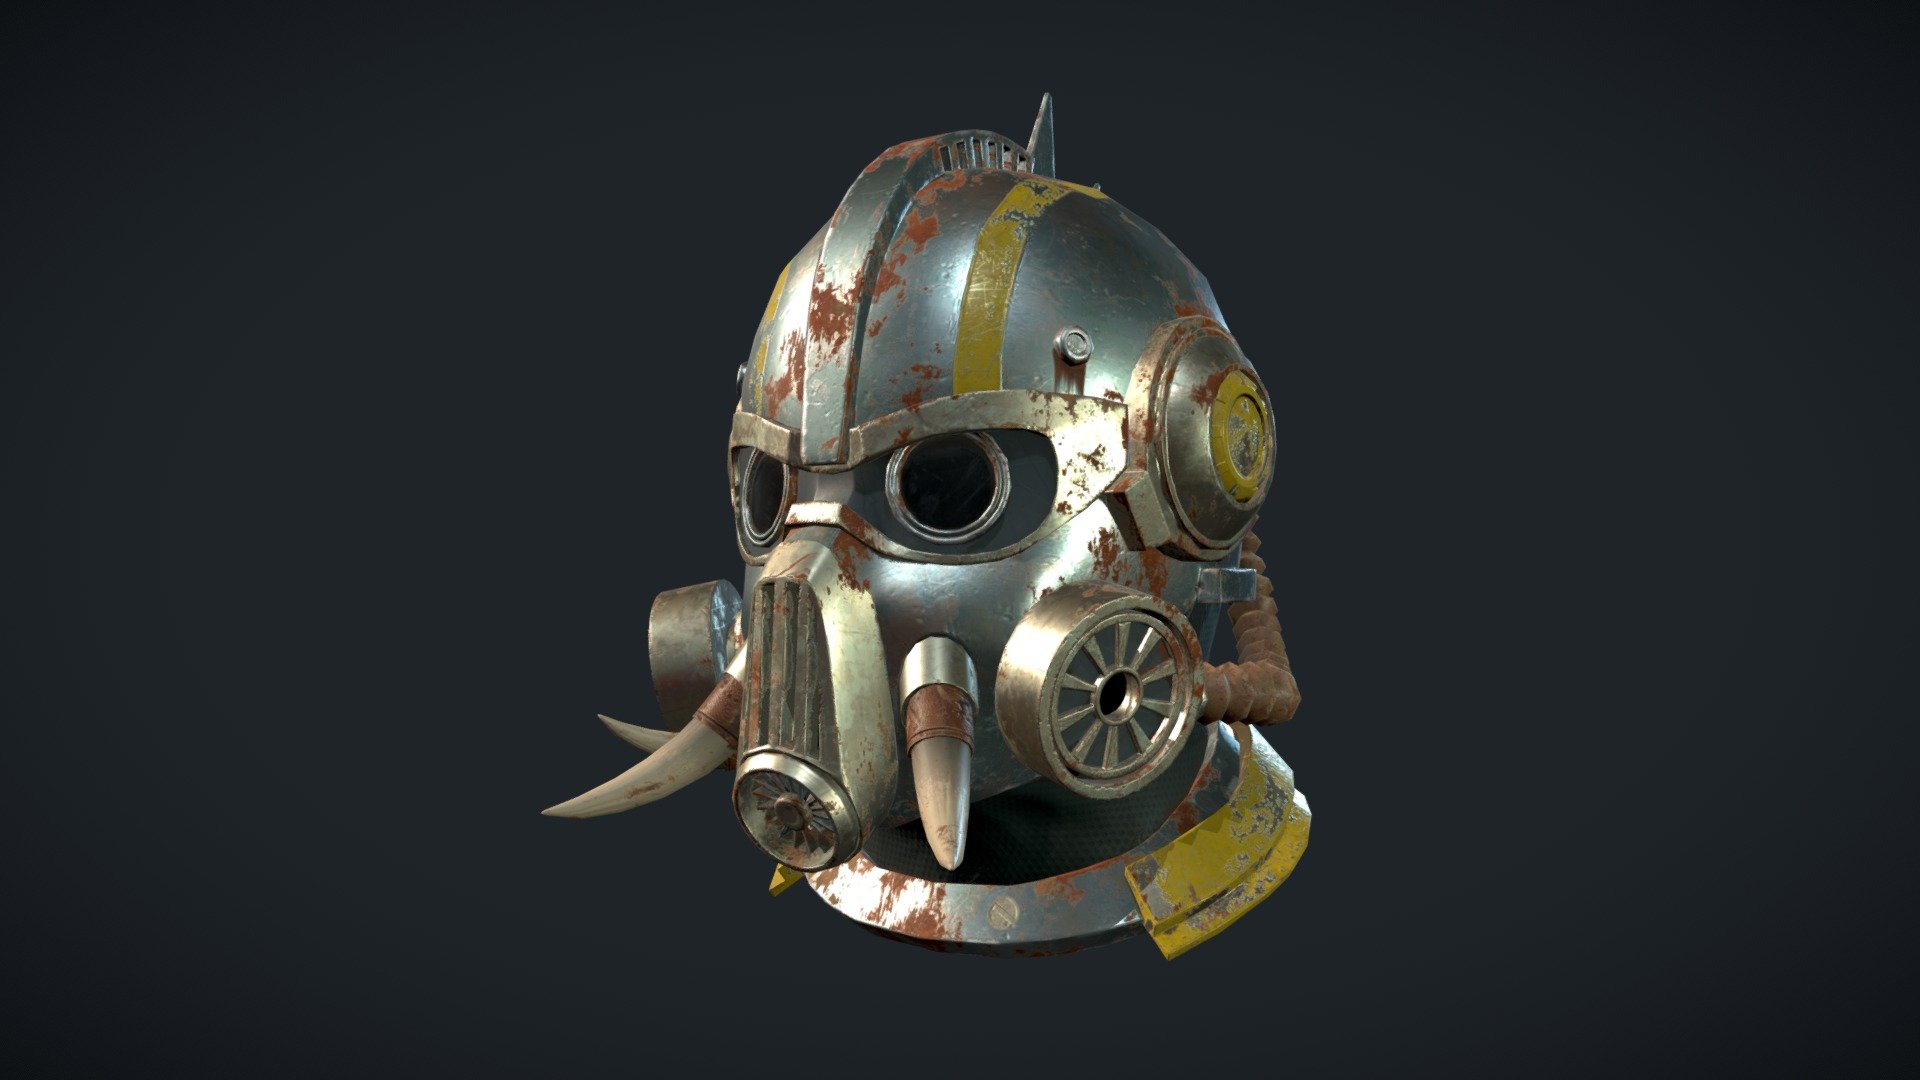 This helmet is every fighter's best friend in the world of Rustborn. The filtering system and tinted glasses give good protection against the sand and sun, the sturdy exterior keeps your precious head safe. Additionally, the tusks make you look scary to signal to other people you are mean and tough.

This prop was modelled and unwrapped in Maya and textured in Substance Painter 3d model